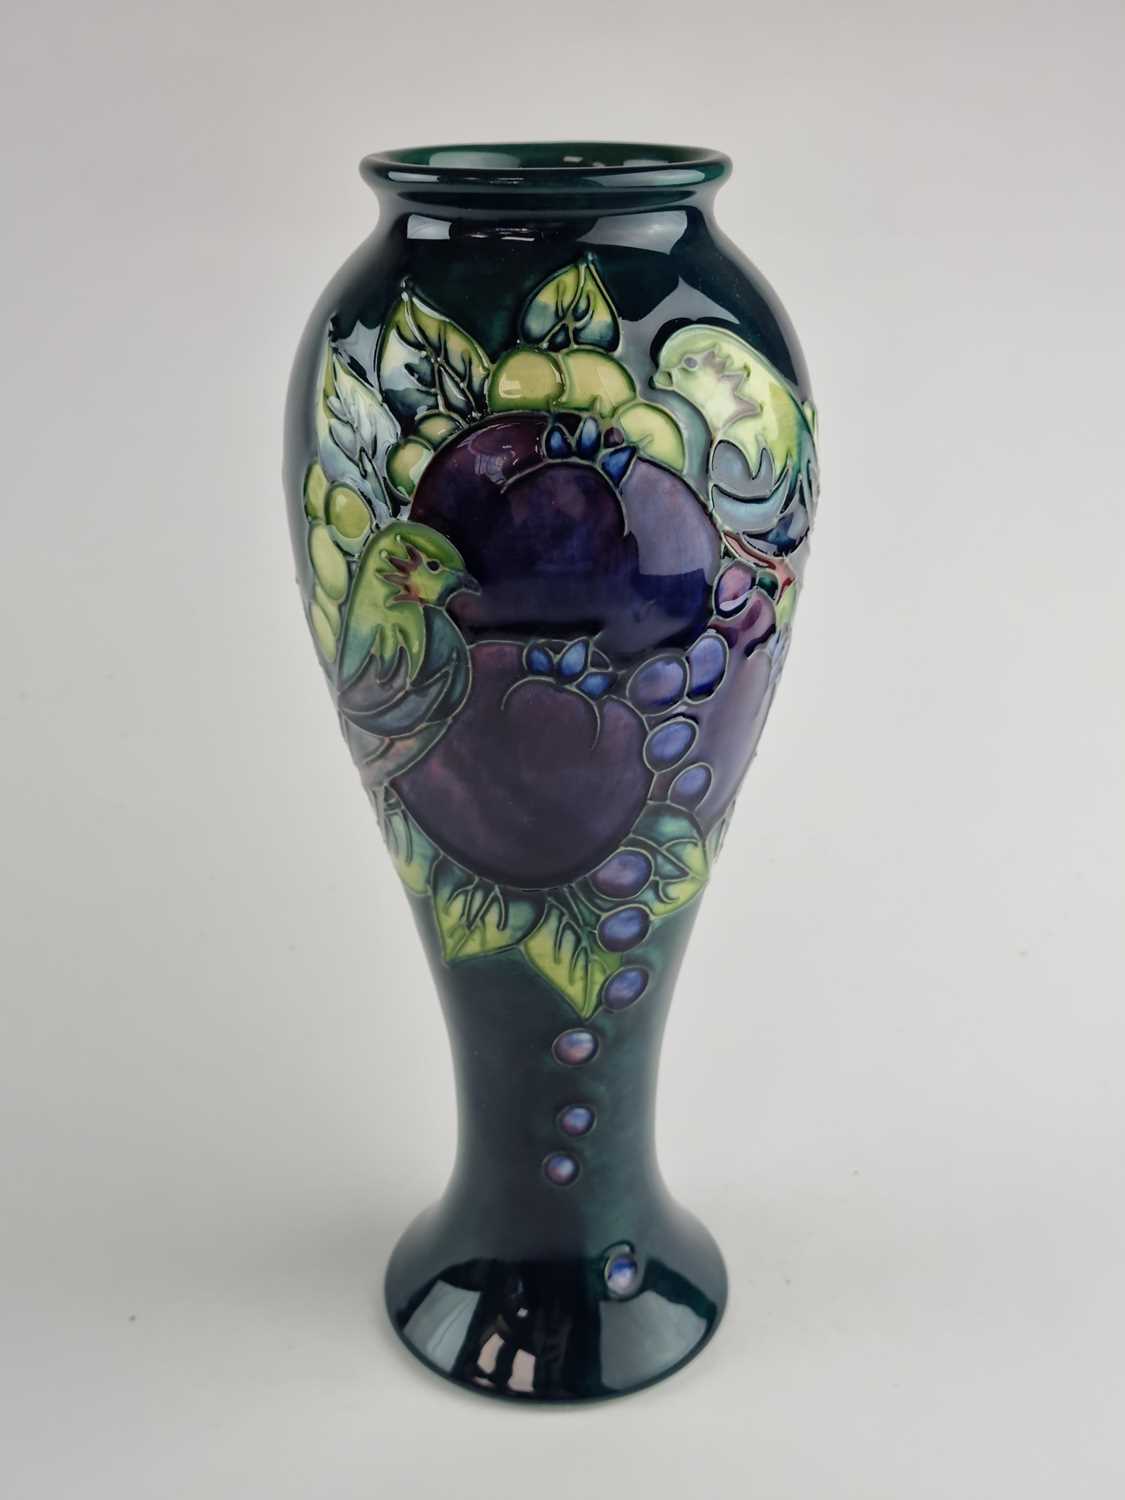 Lot Moorcroft 'Blue Finches' vase designed by Sally Tuffin